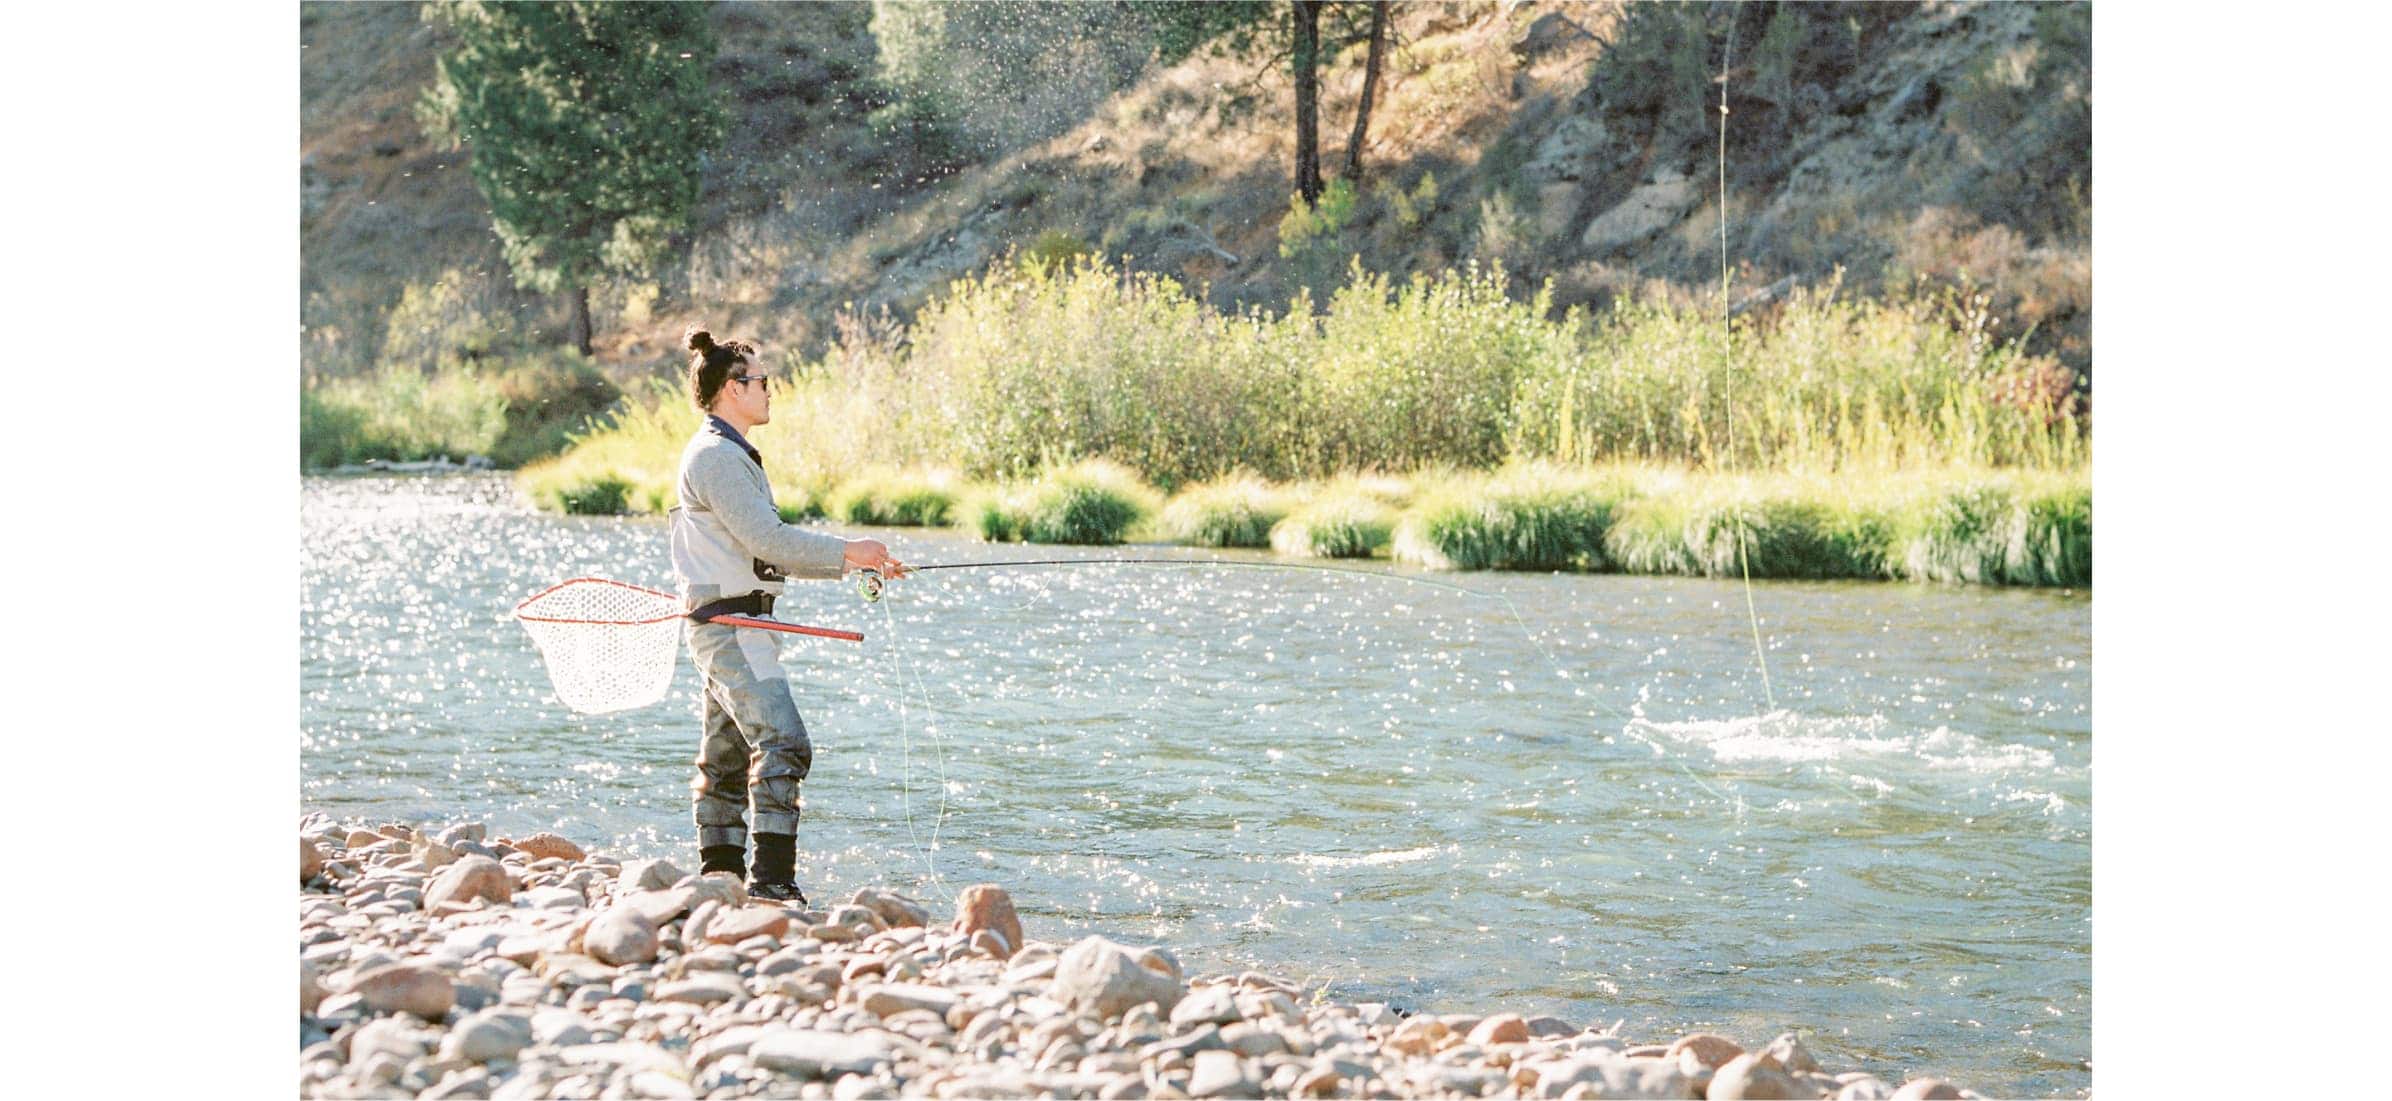 Burton stands at the edge of a sunlit river fishing.